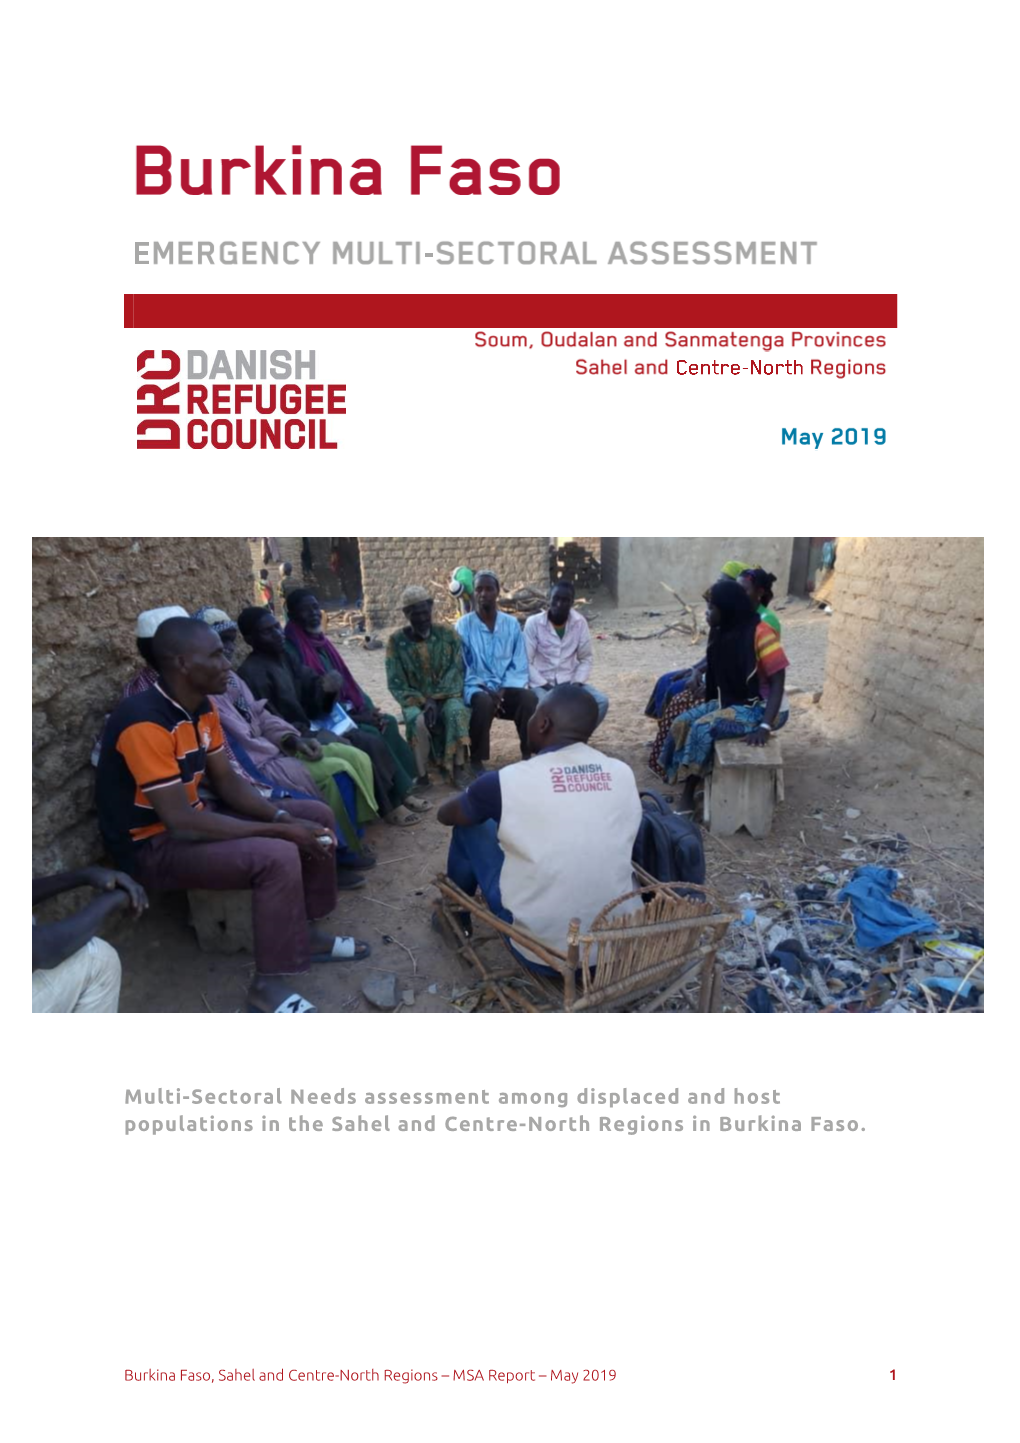 Multi-Sectoral Needs Assessment Among Displaced and Host Populations in the Sahel and Centre-North Regions in Burkina Faso